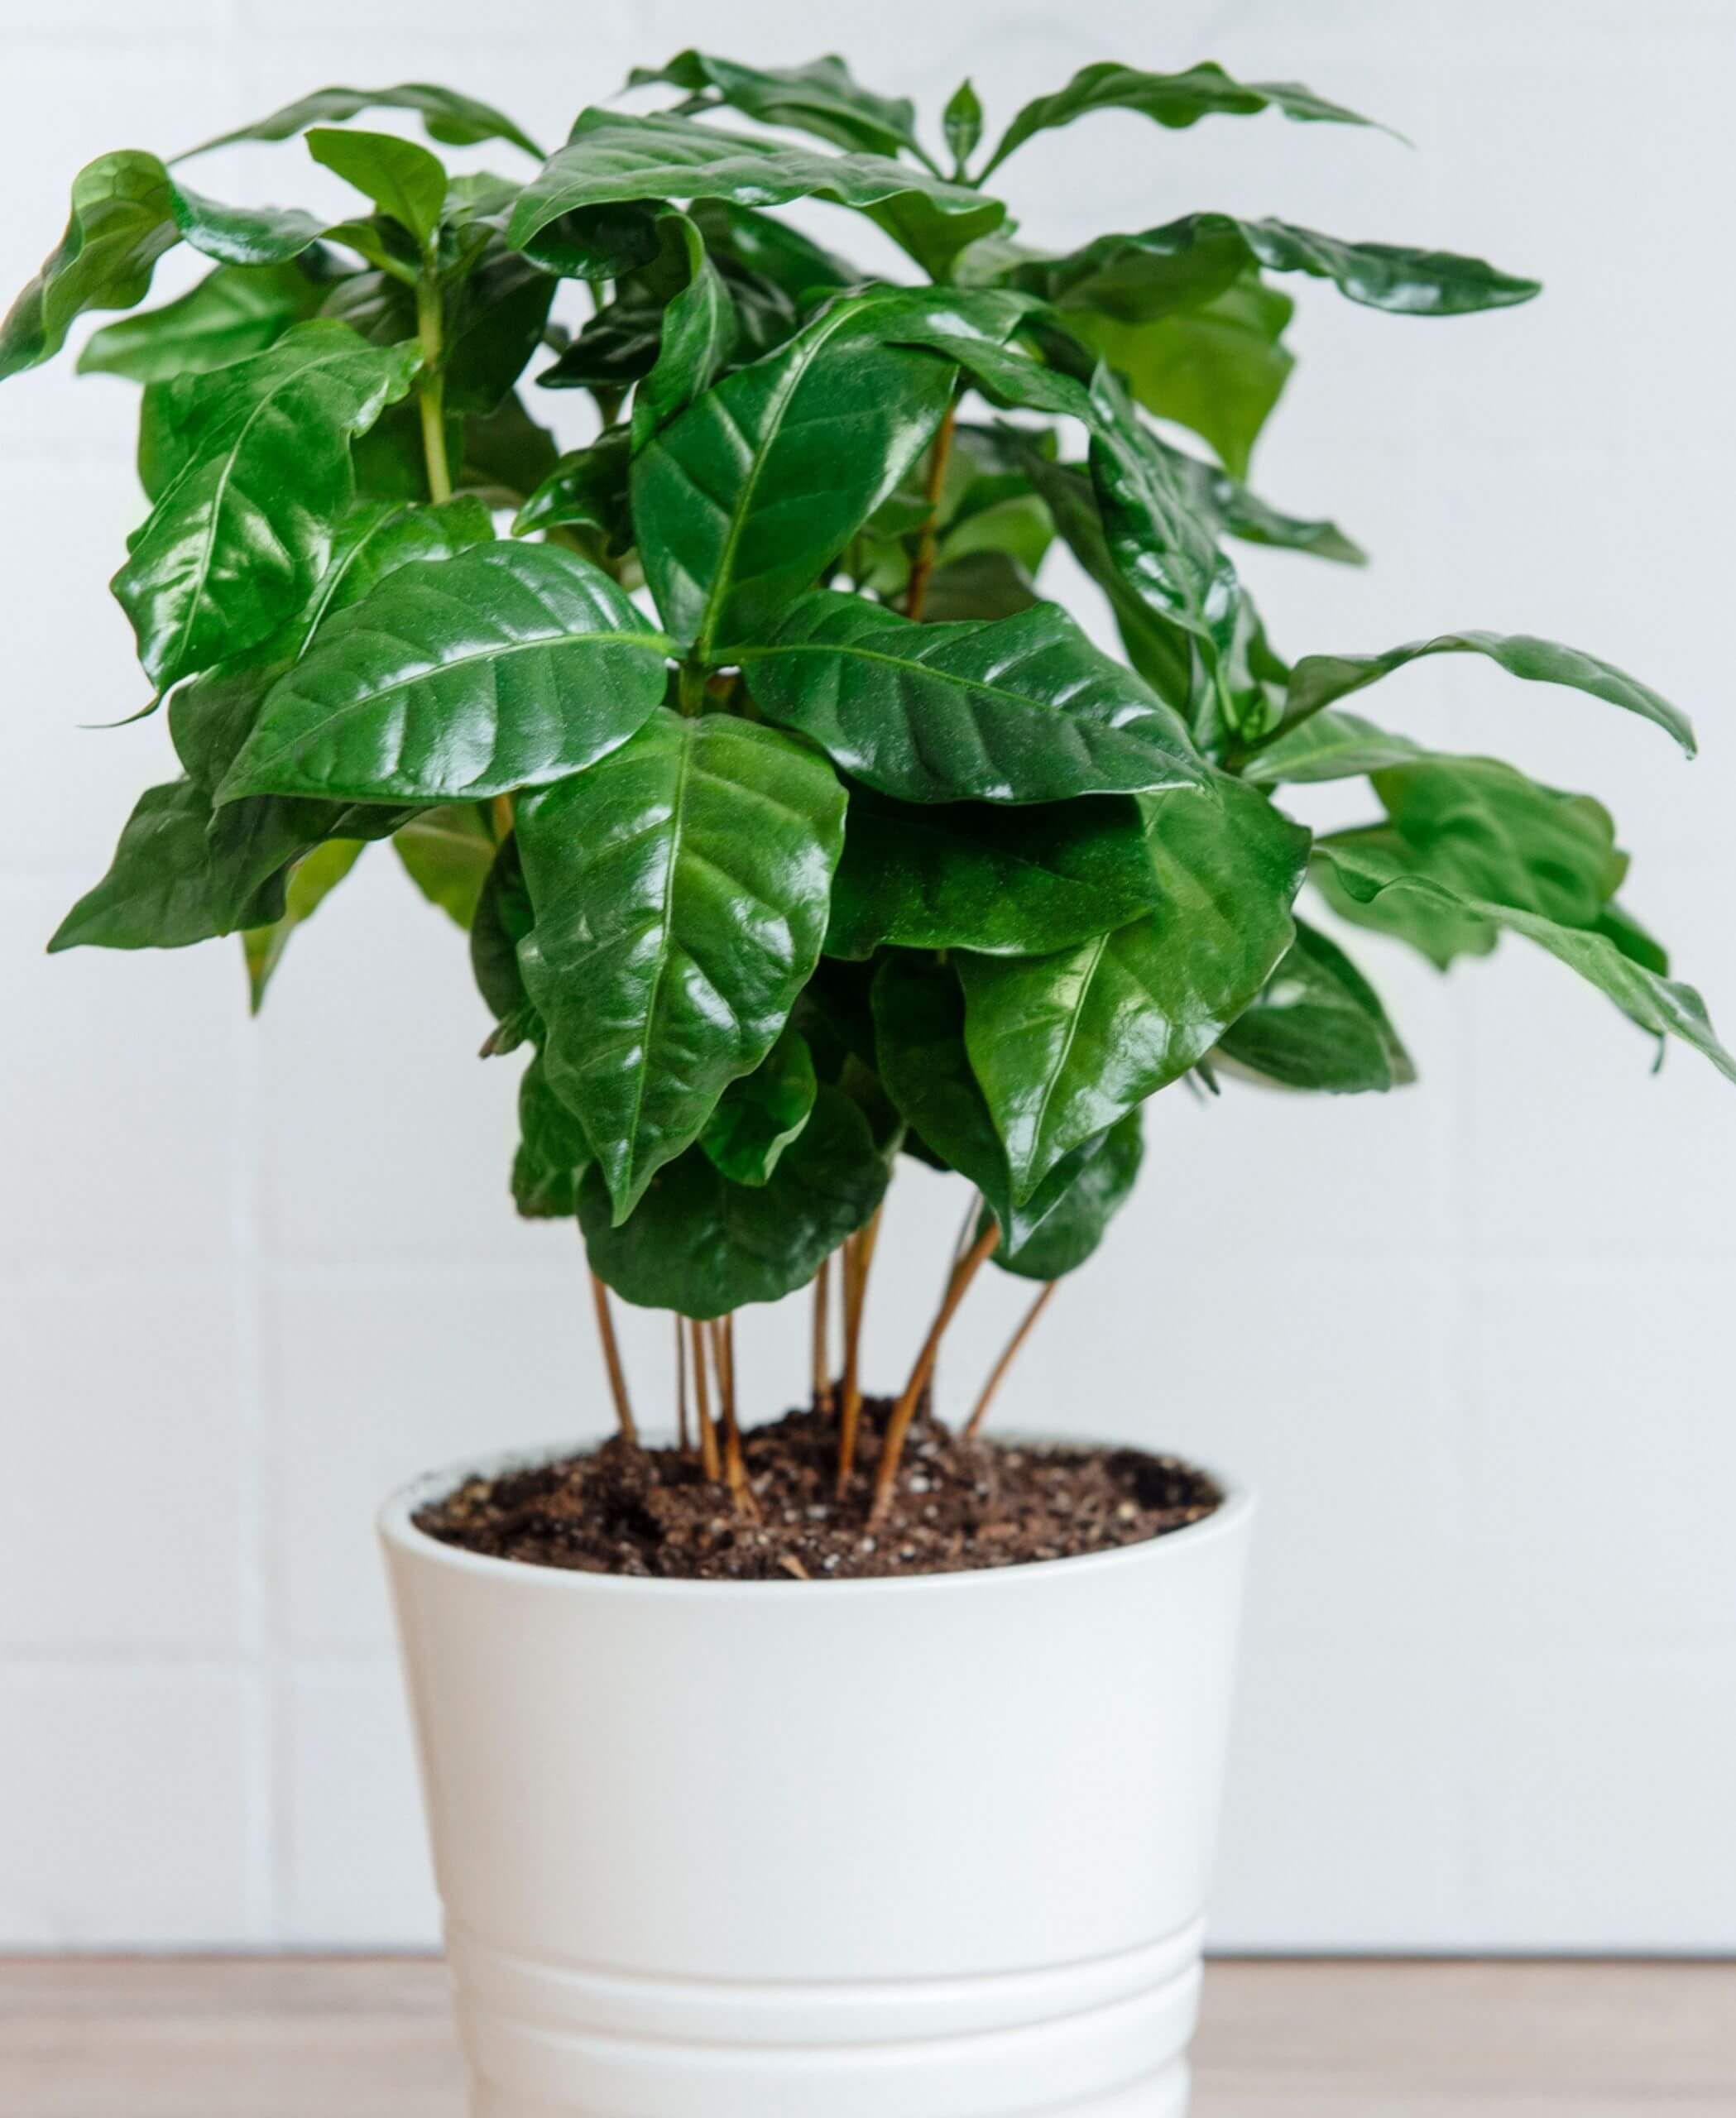 why isn't my coffee plant flowering? | bloomscape